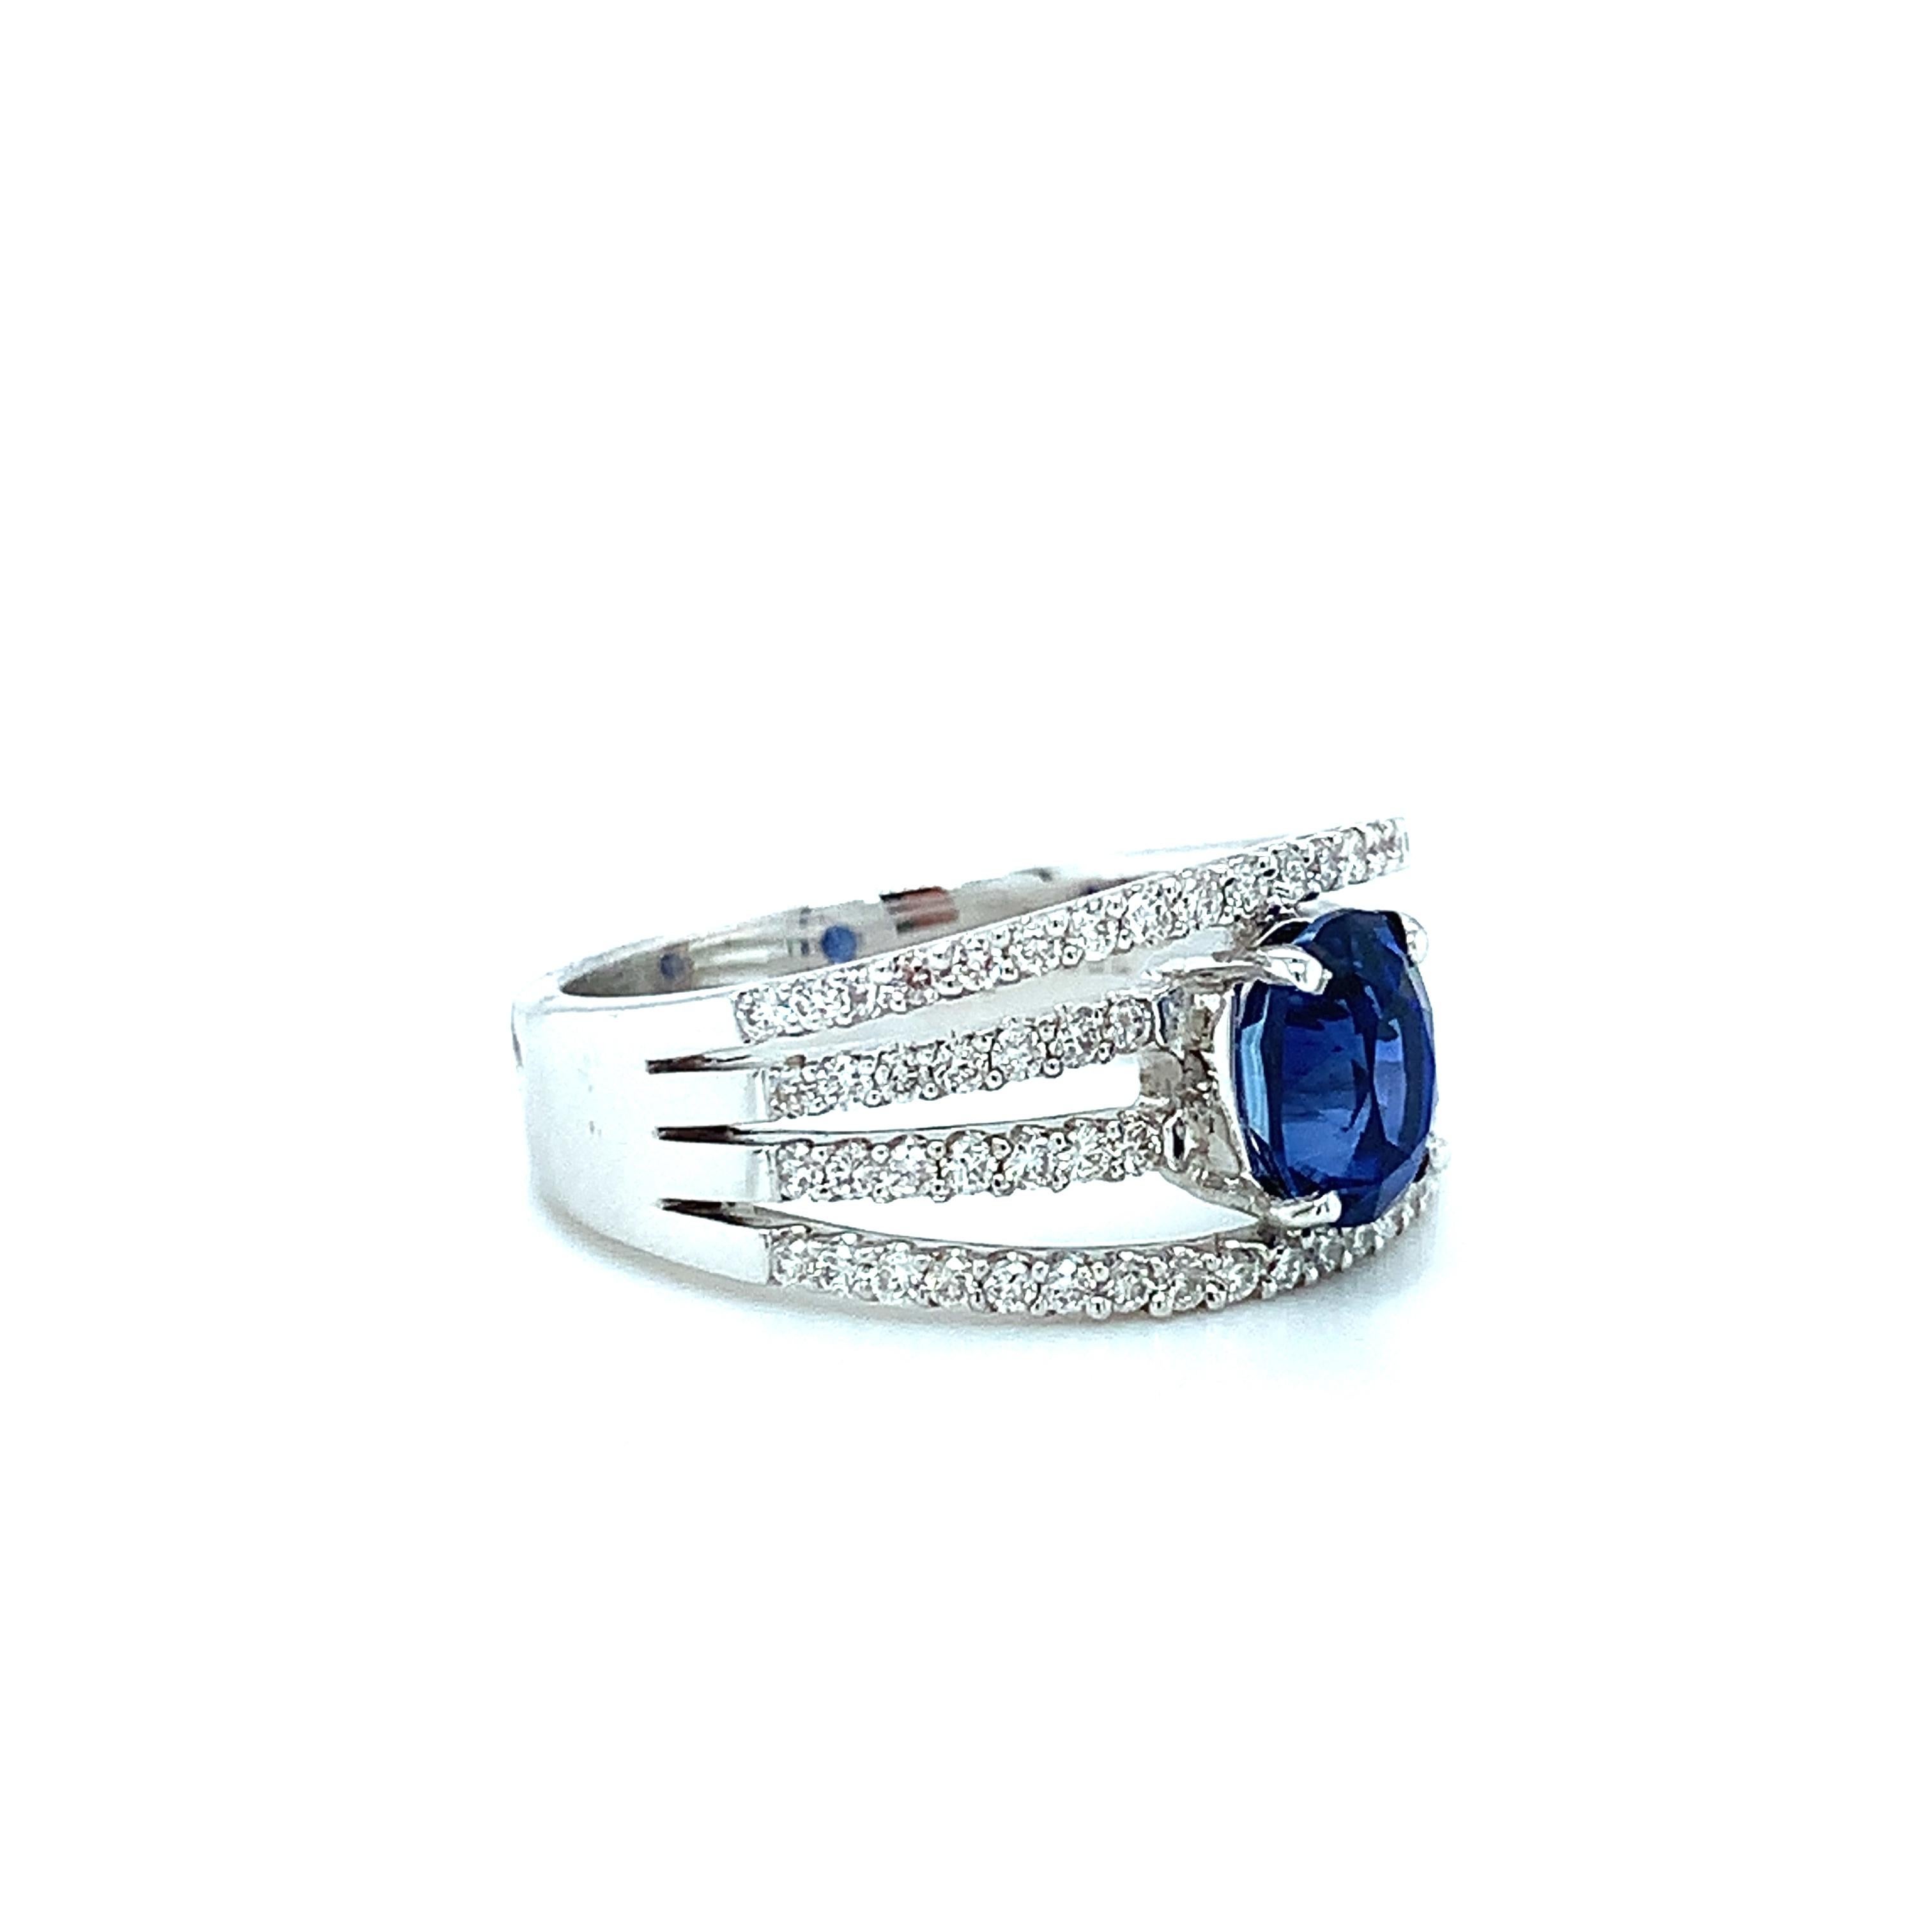 Royal Blue Sapphire and 4-Row Diamond Engagement Ring in White Gold, 1.56 Carat  In New Condition For Sale In Los Angeles, CA